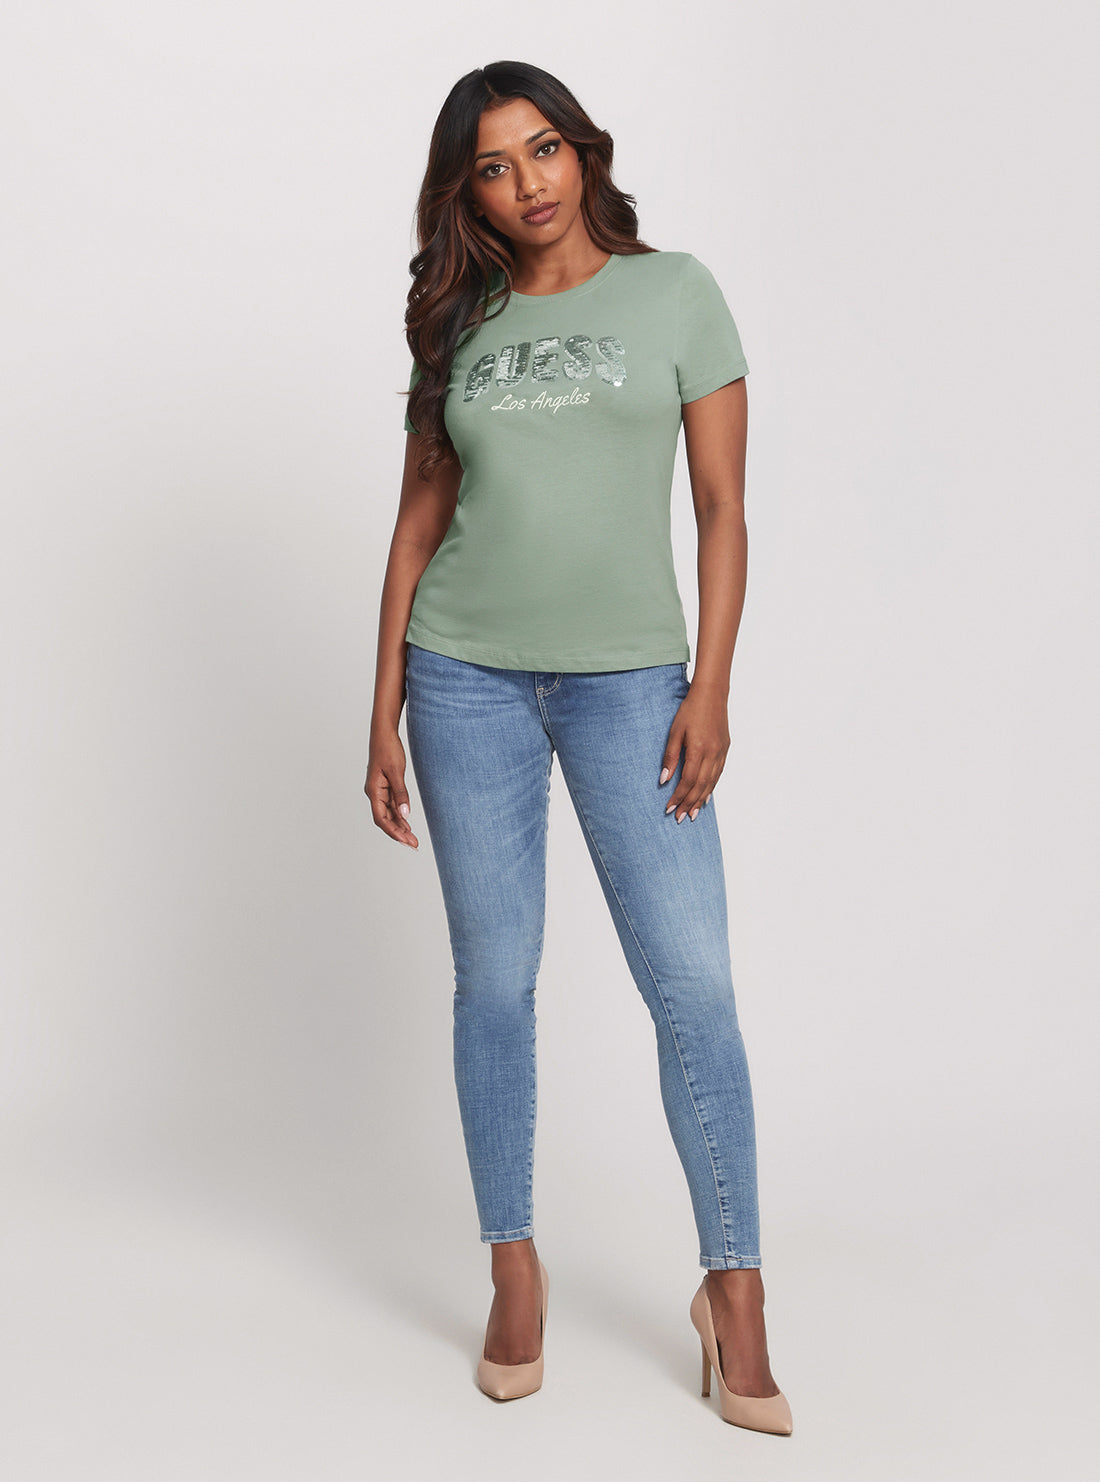 GUESS Eco Green Sequins Logo T-Shirt full view